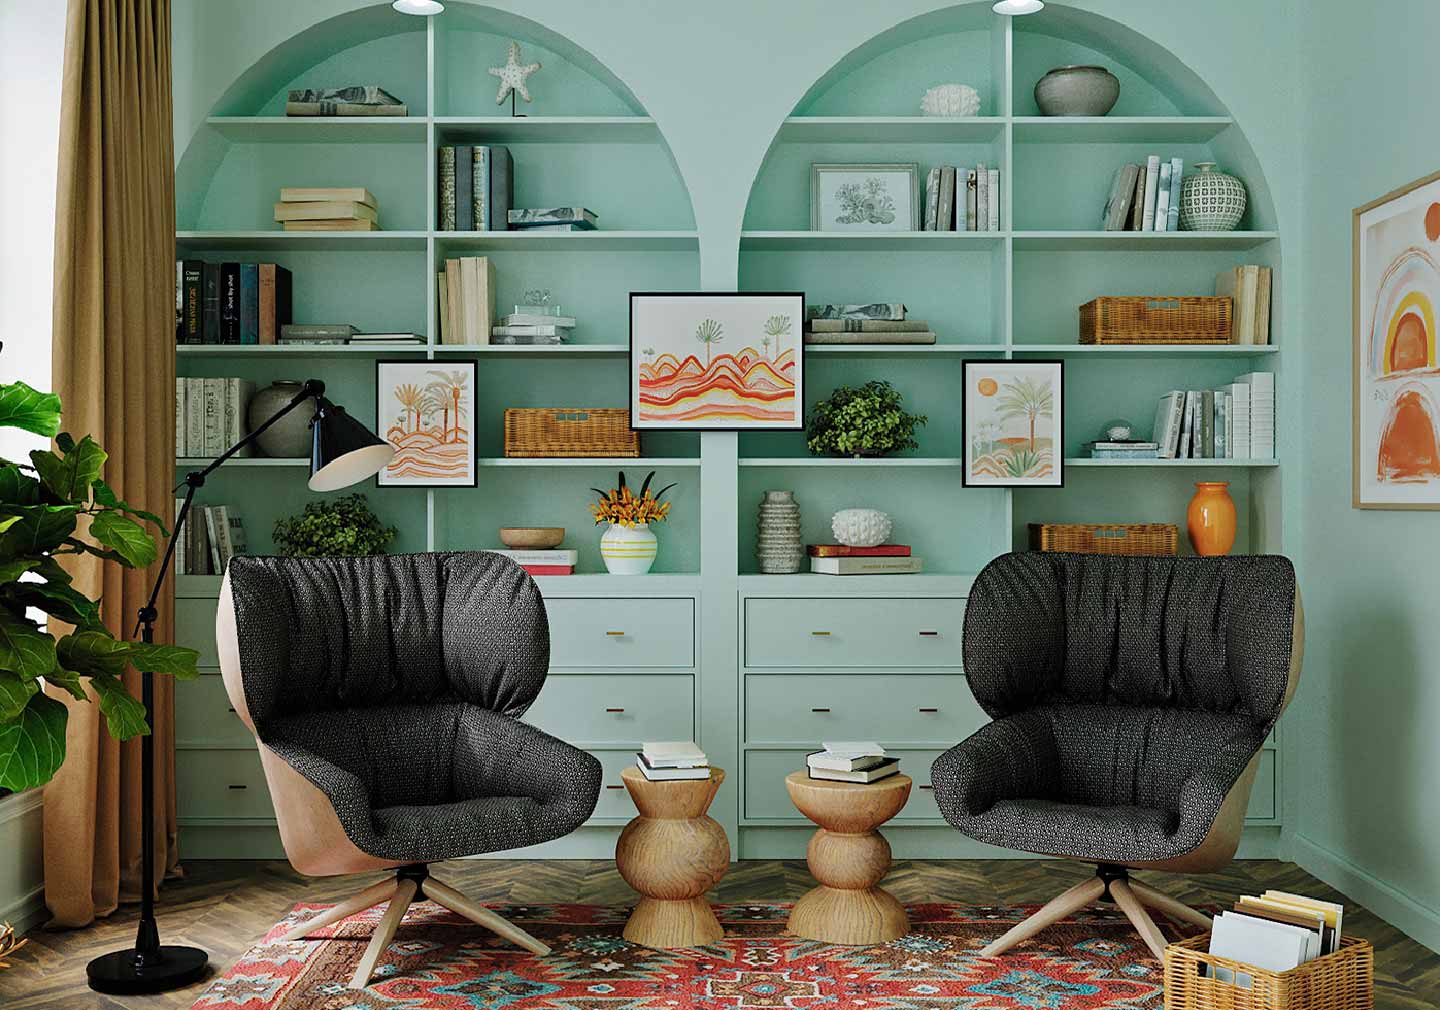 Exclusive Home Libraries designs